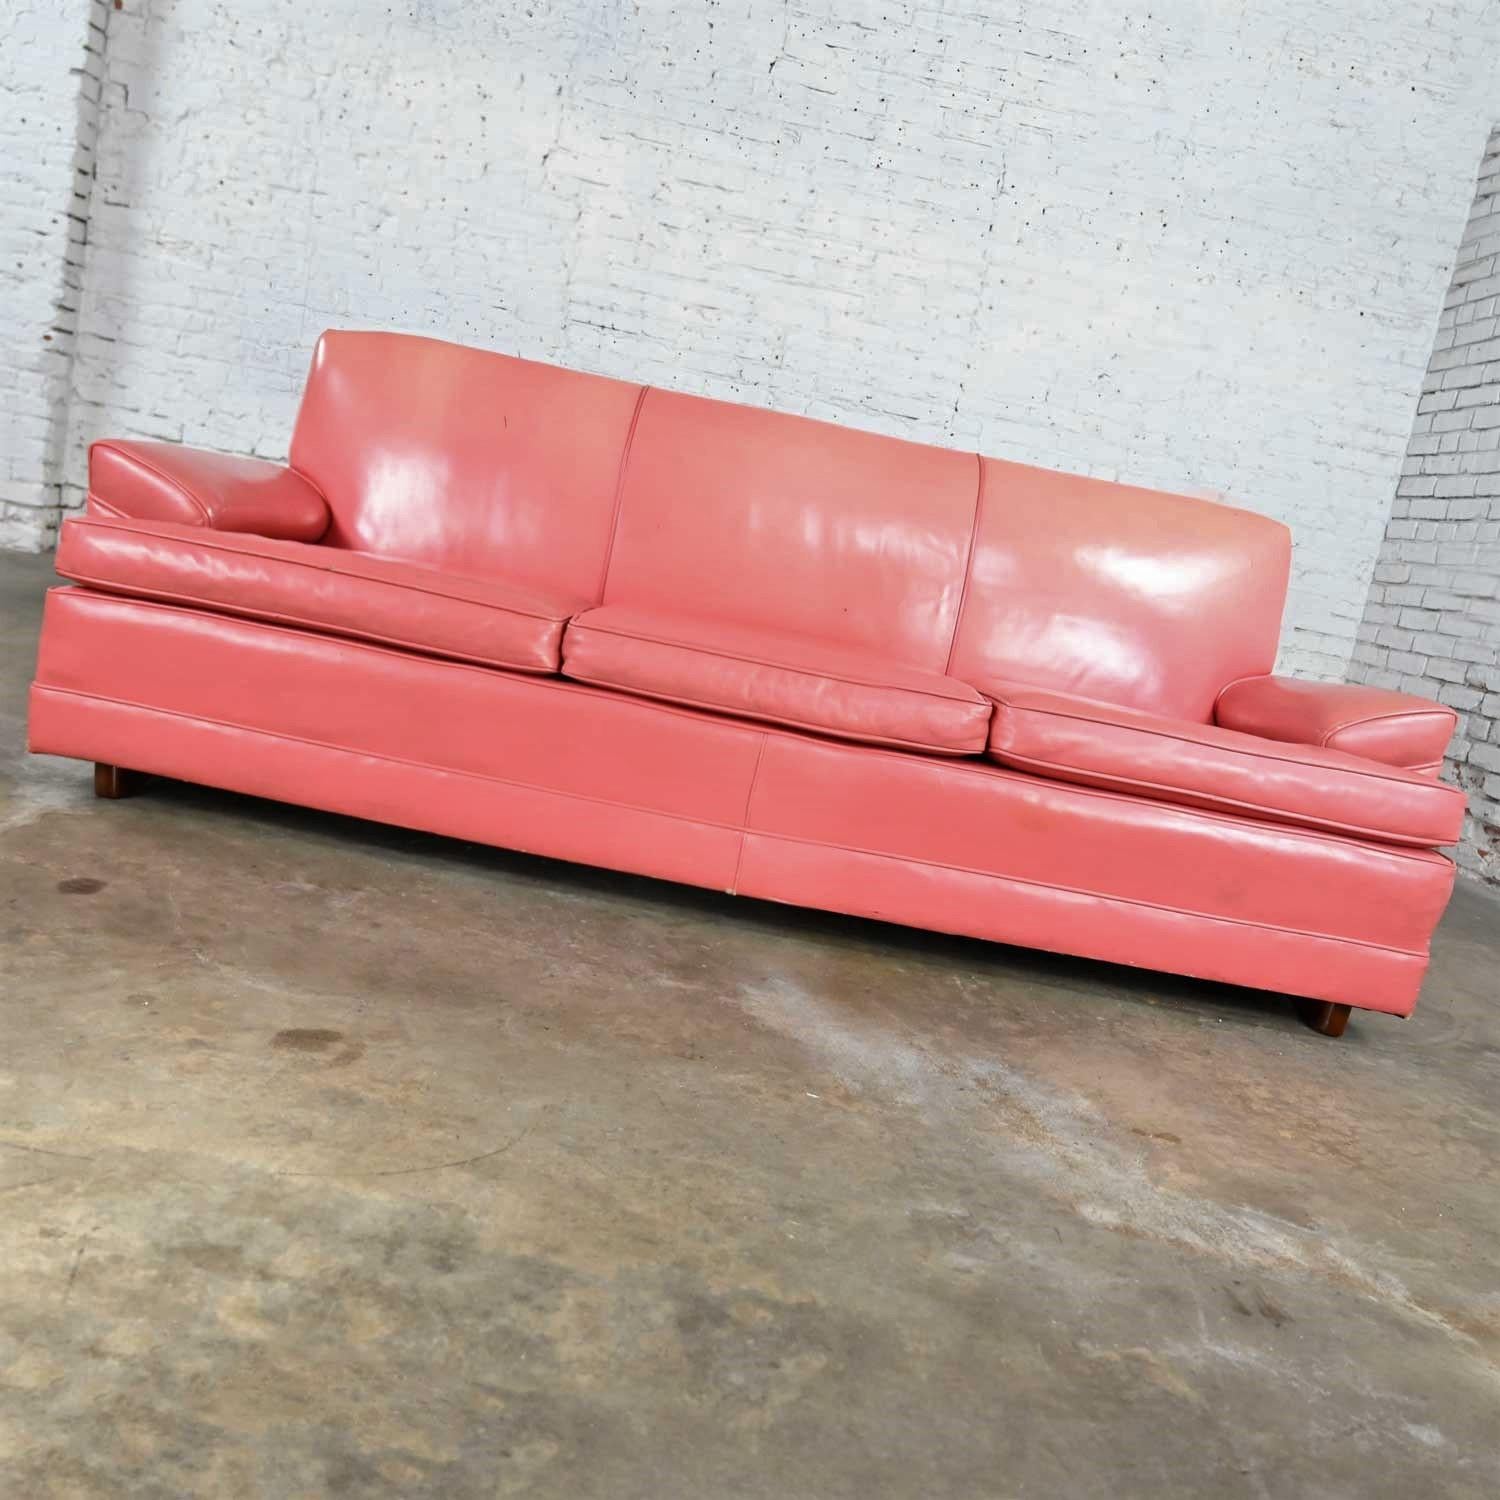 Fantastic vintage Hollywood Regency Art Deco sofa with original pink leather and three loose seat cushions. Beautiful condition, keeping in mind that this is vintage and not new so will have signs of use and wear. There is a lot of wear, pinholes,